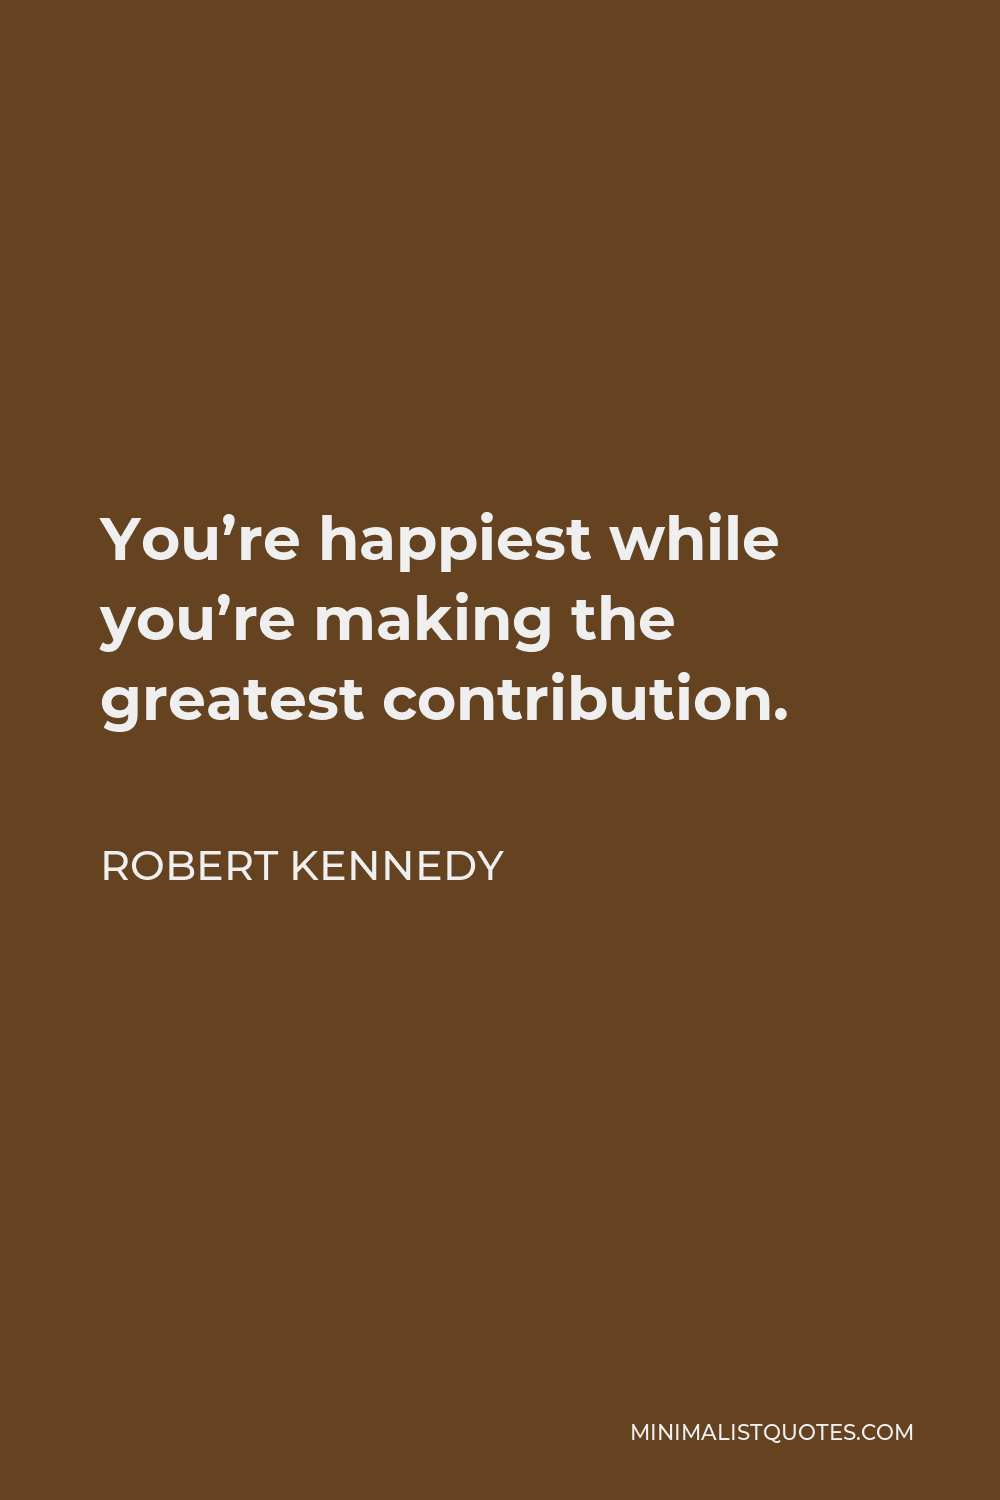 Robert Kennedy Quote - You’re happiest while you’re making the greatest contribution.